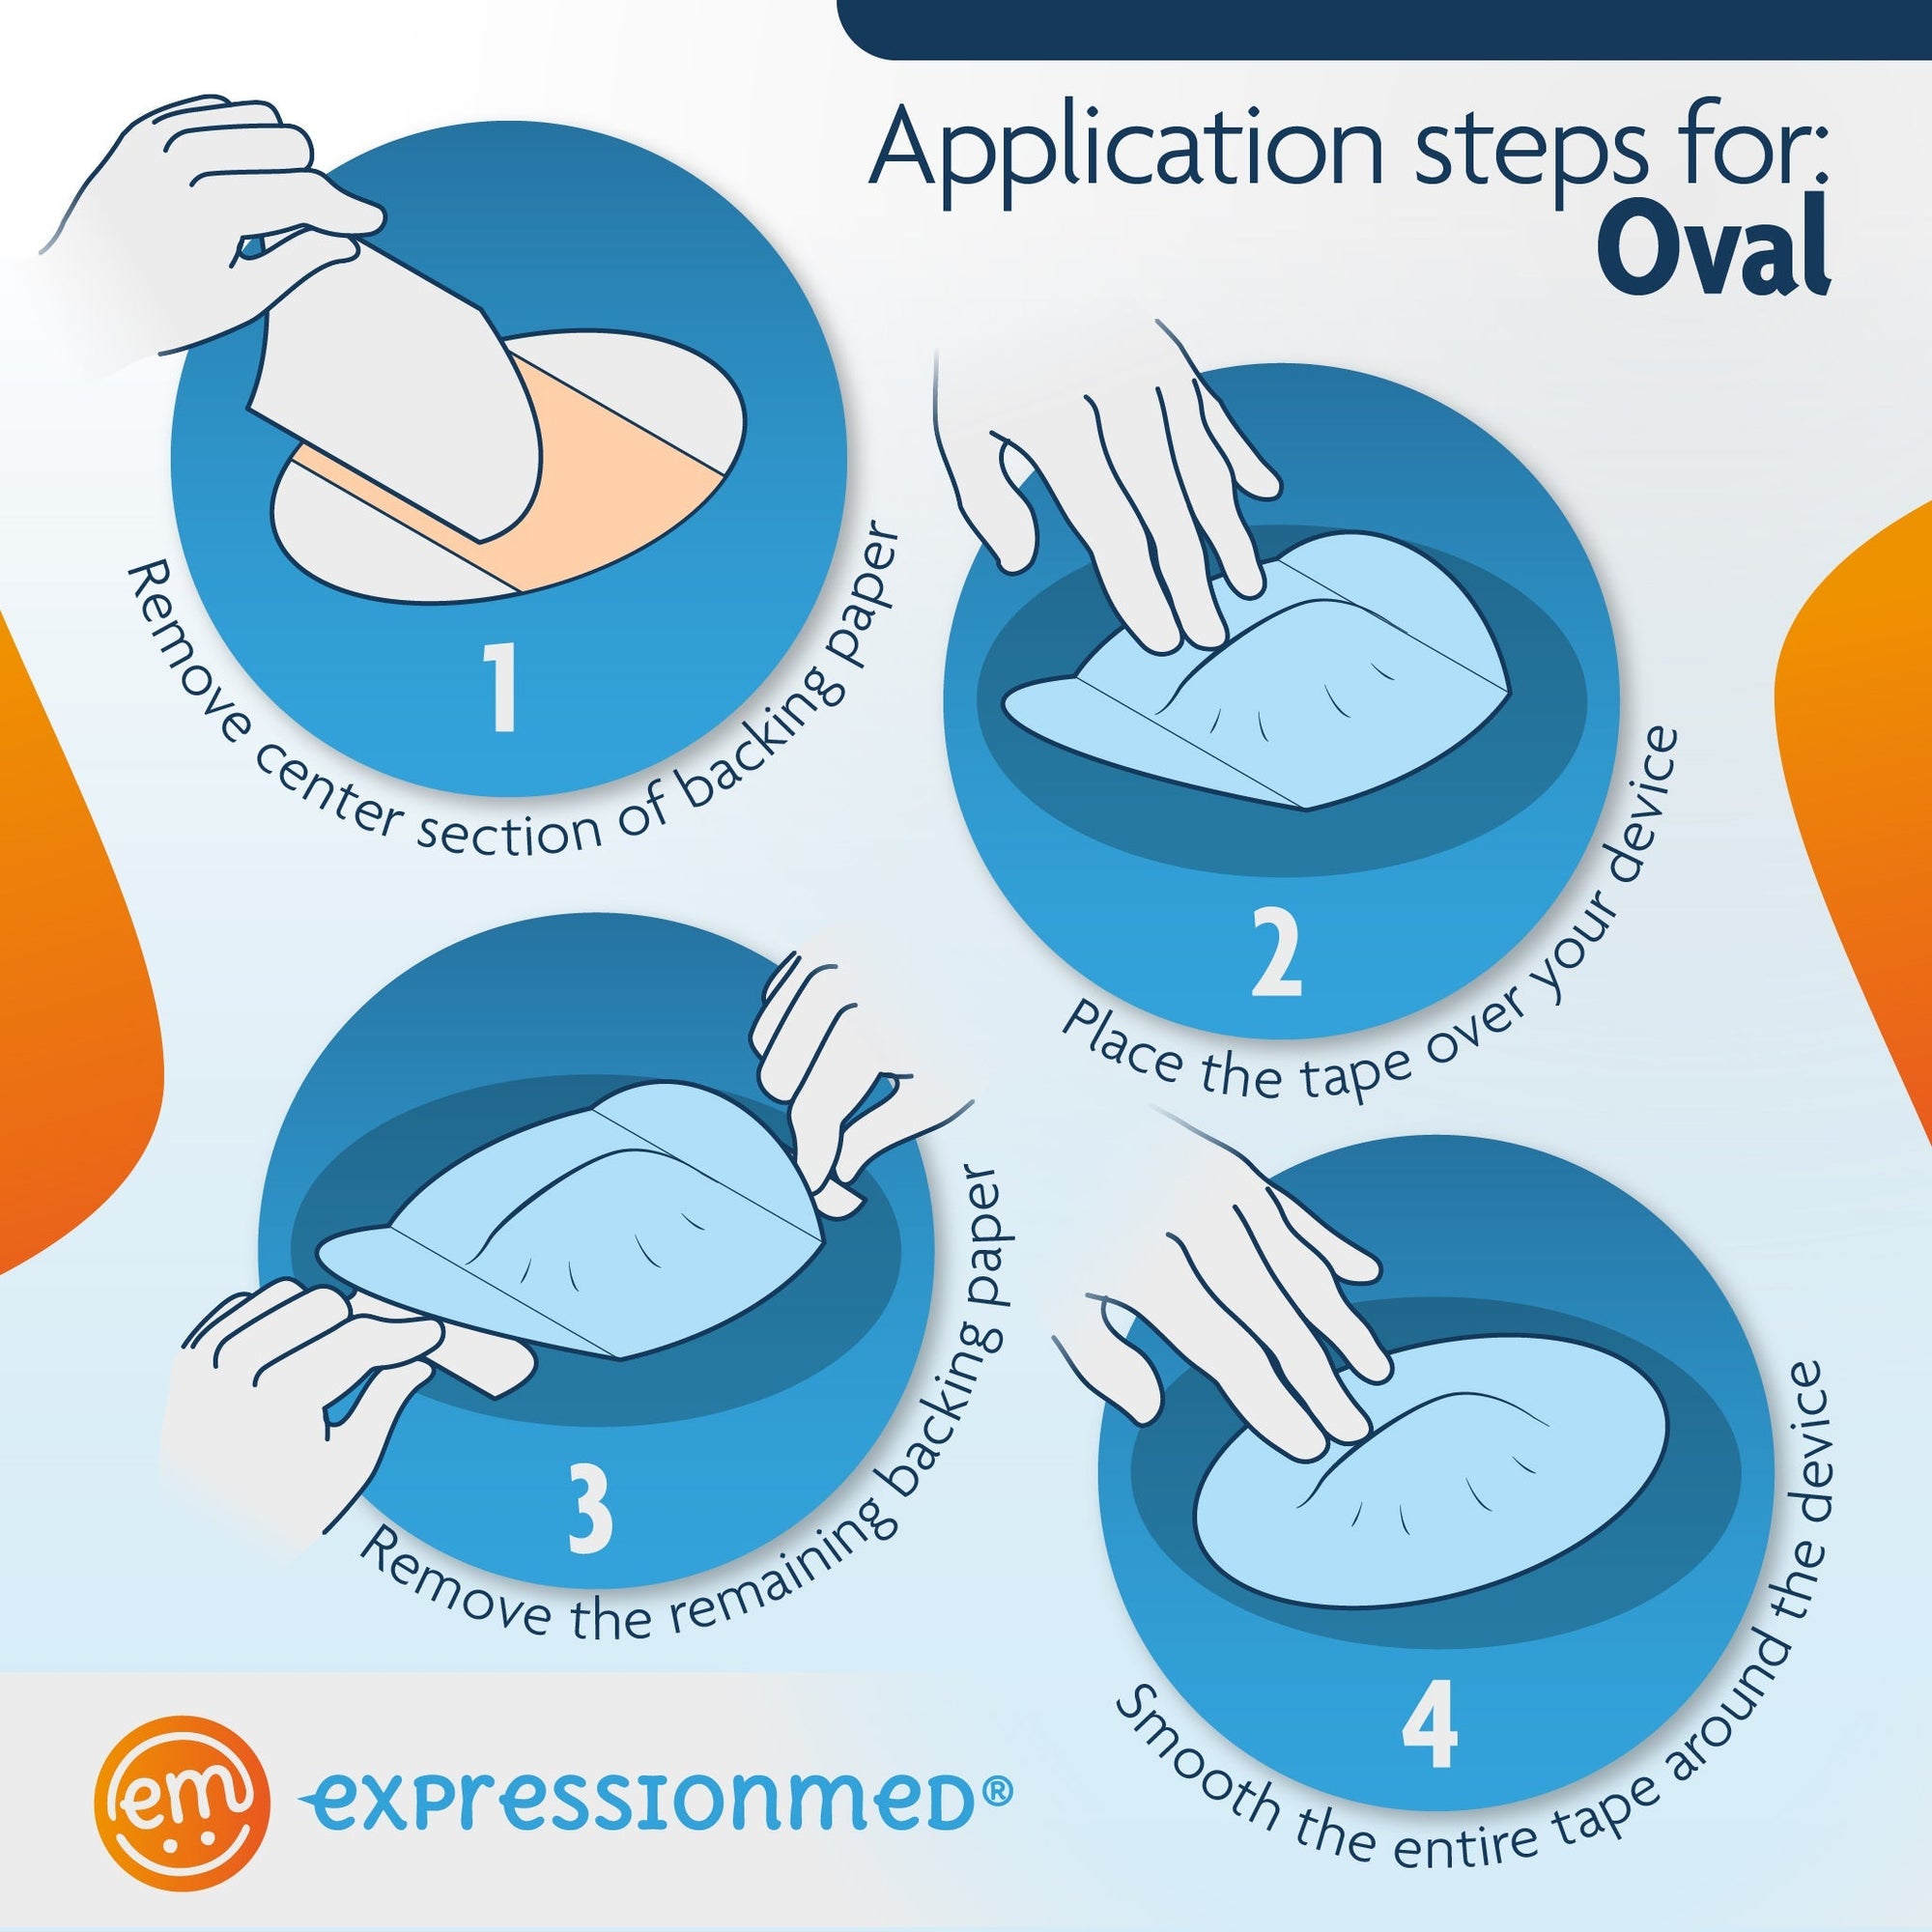 Application Instructions . 1. Prep skin with soap and water. 2. Remove Middle Section and lay center hole over device. 3. Peel off both end sections and smooth down on skin. To remove, hold an edge and strech material off skin.